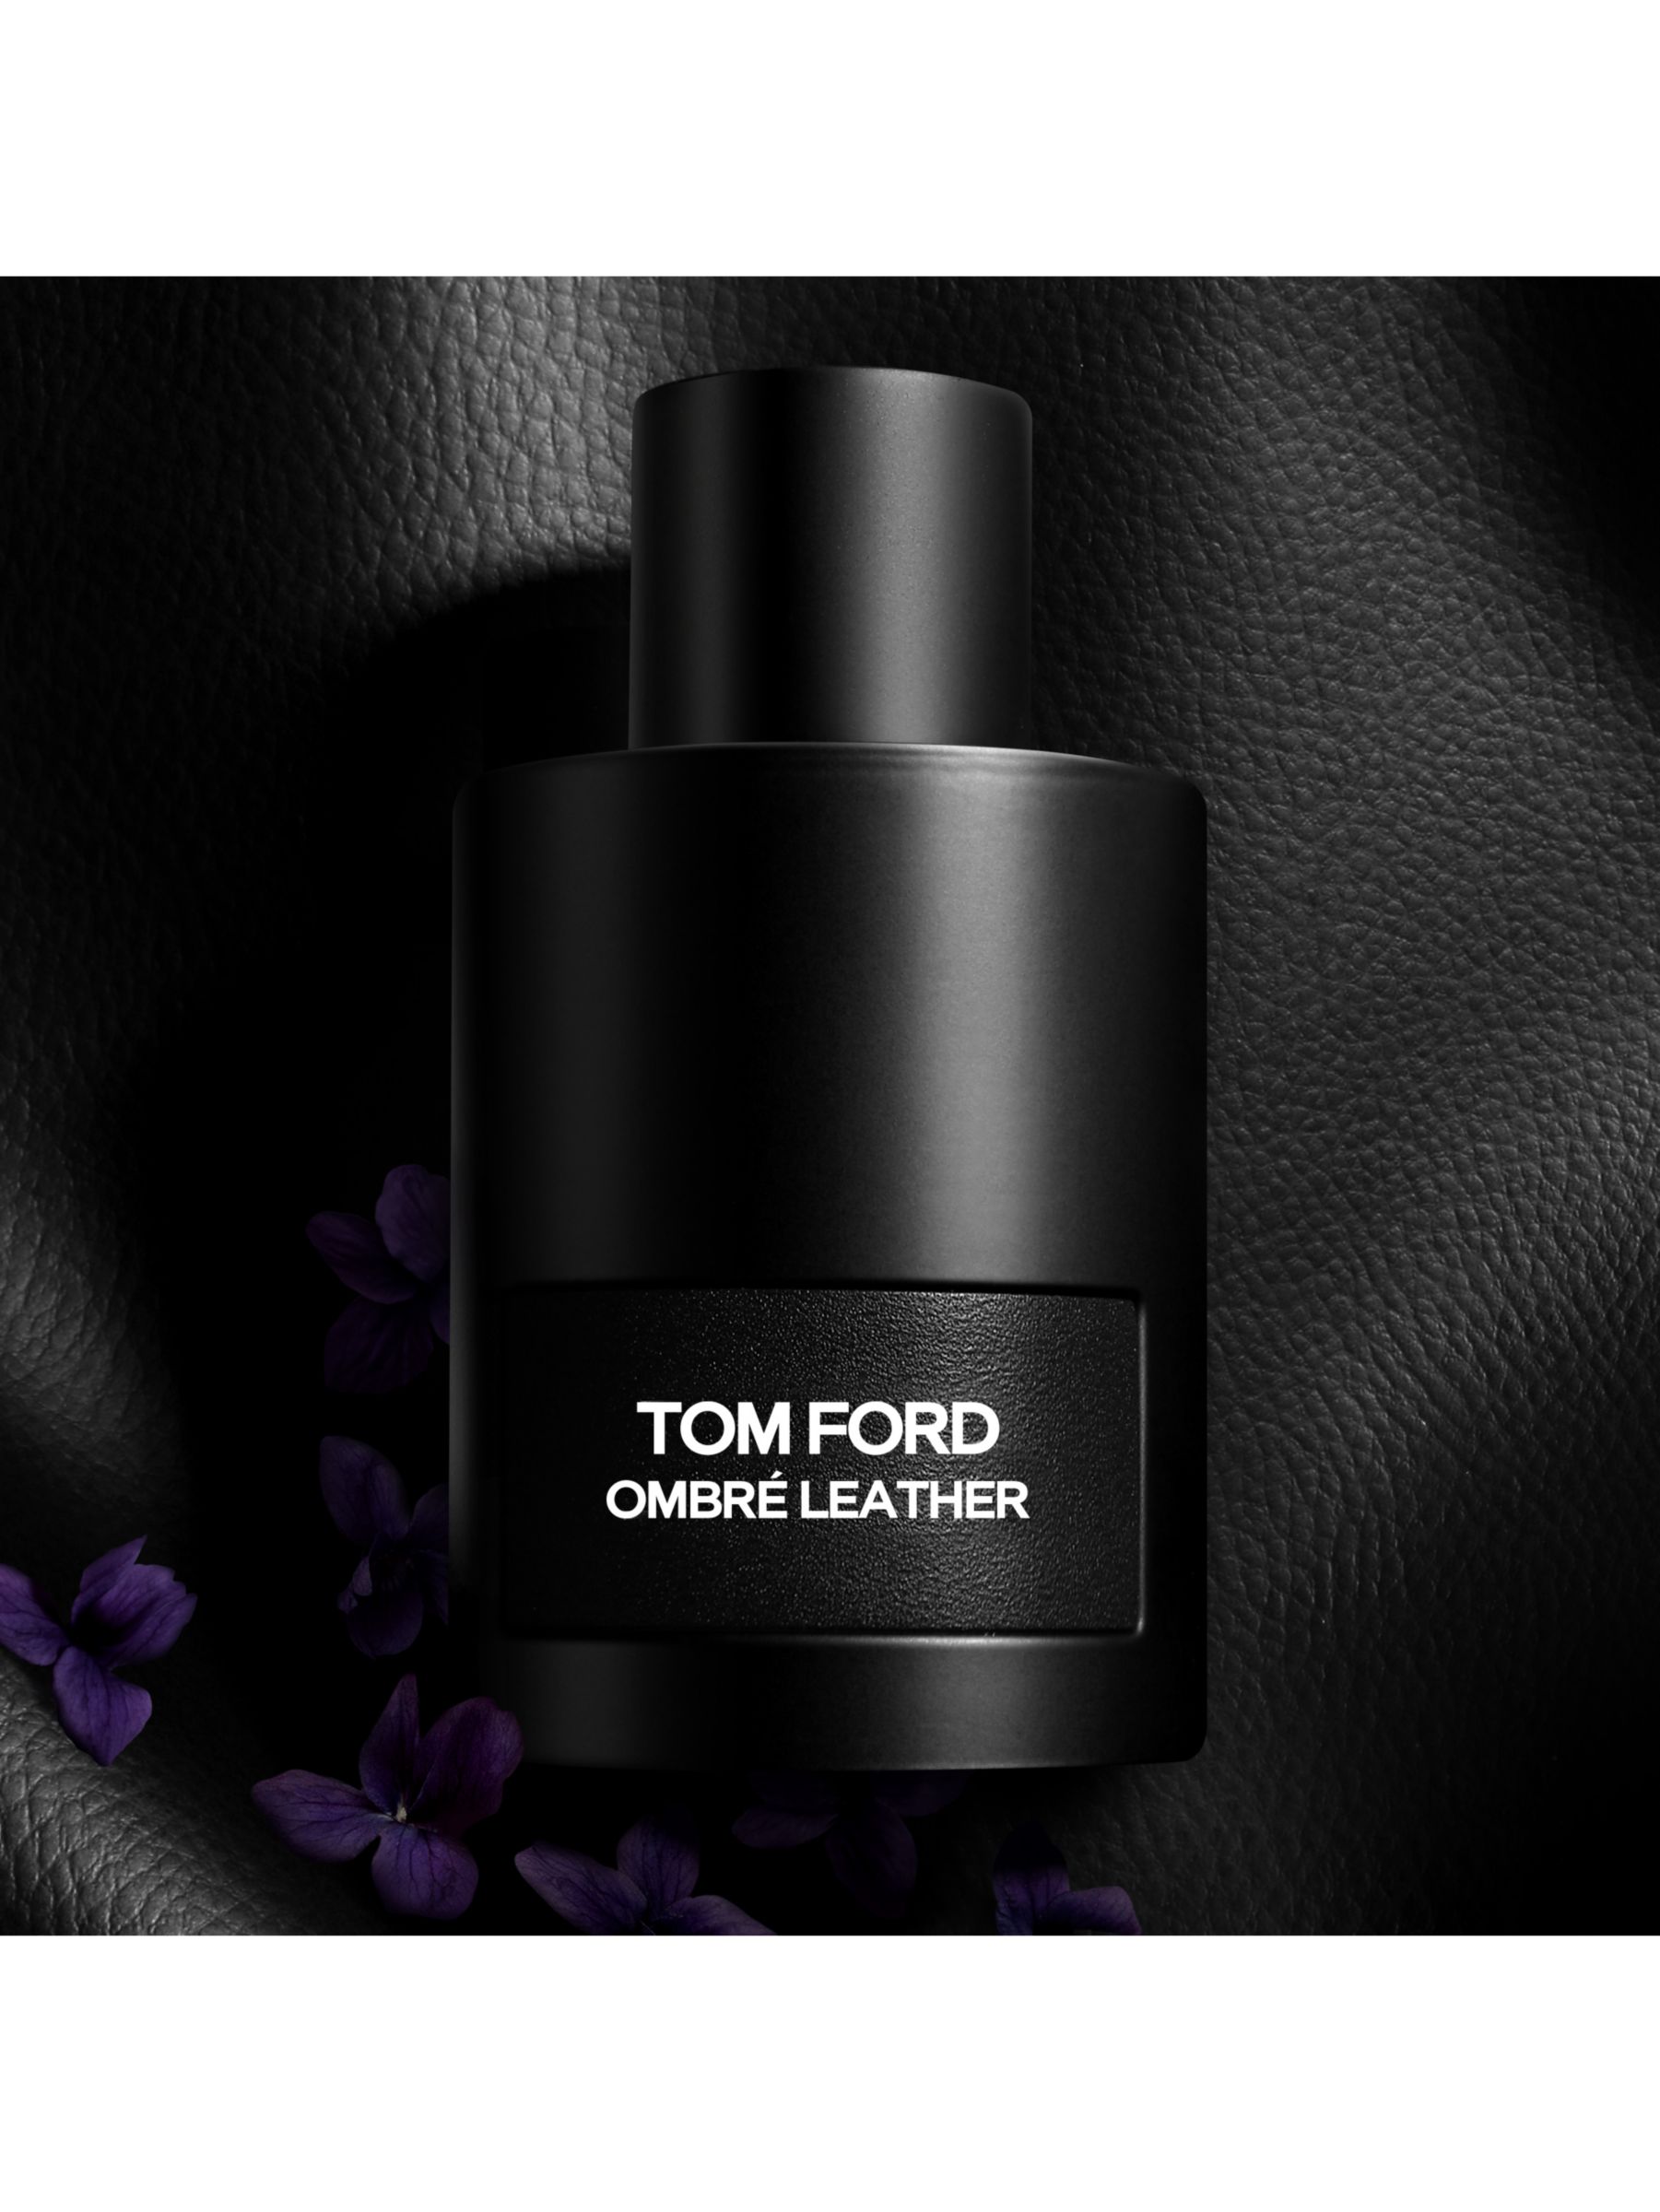 ORIGINAL] TOM FORD OMBRE LEATHER 100ML EDP FOR UNISEX, Beauty